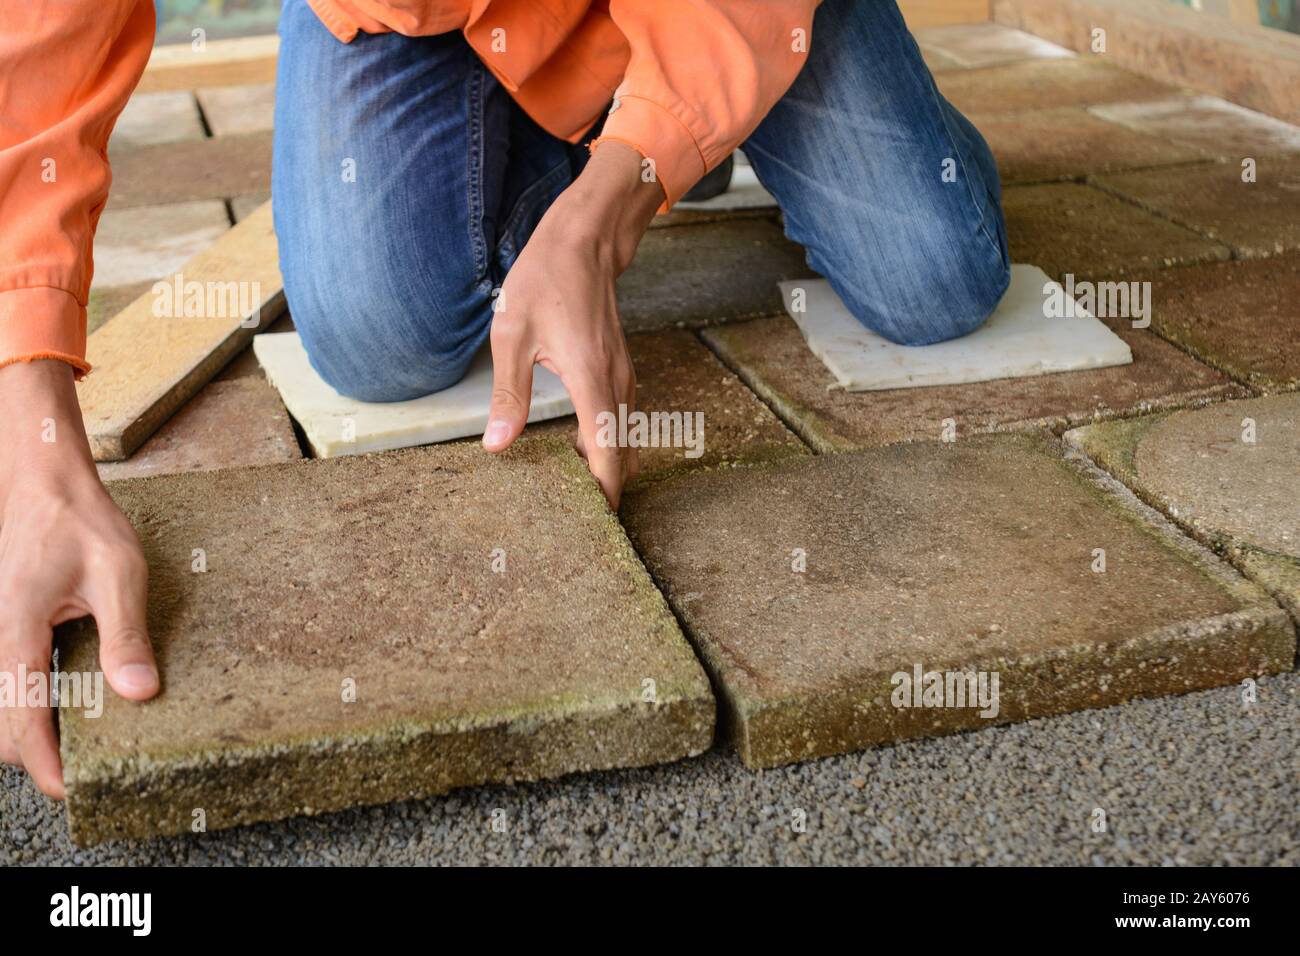 Skilled worker paves floor with stone slabs Stock Photo